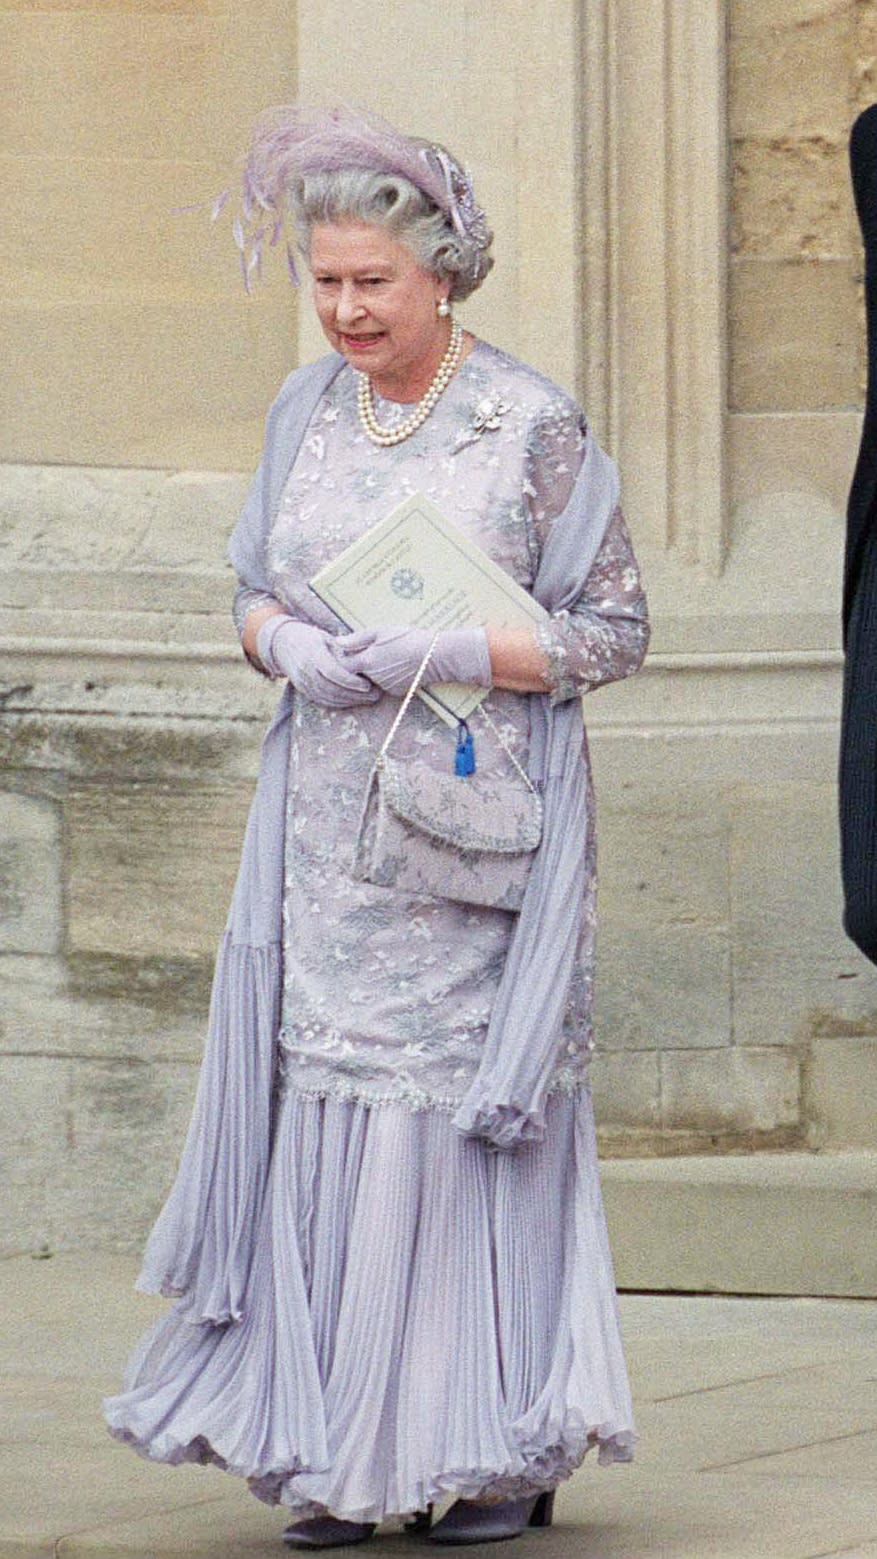 Queen Elizabeth leaves St George's Chapel after the wedding of Prince Edward and Sophie in 1999